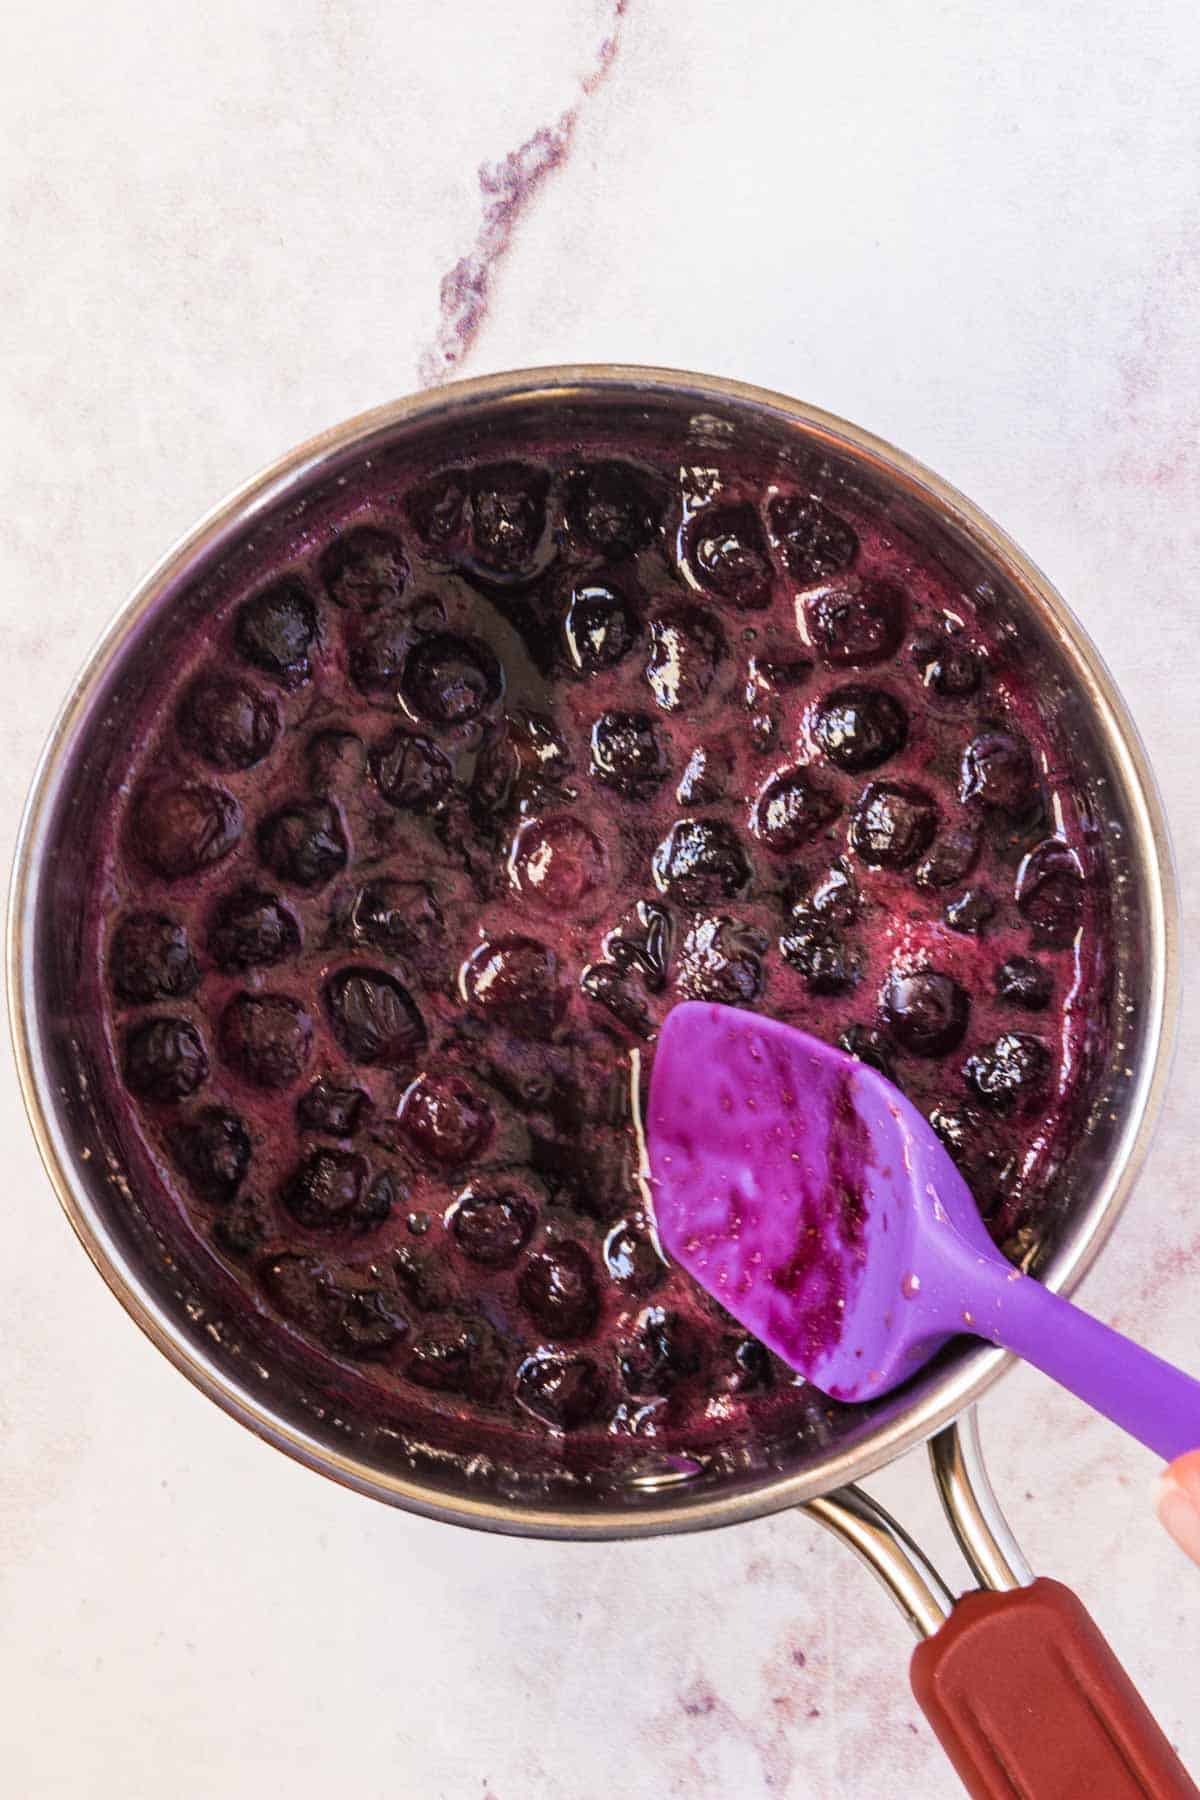 Homemade blueberry sauce being stirred with a purple rubber spatula